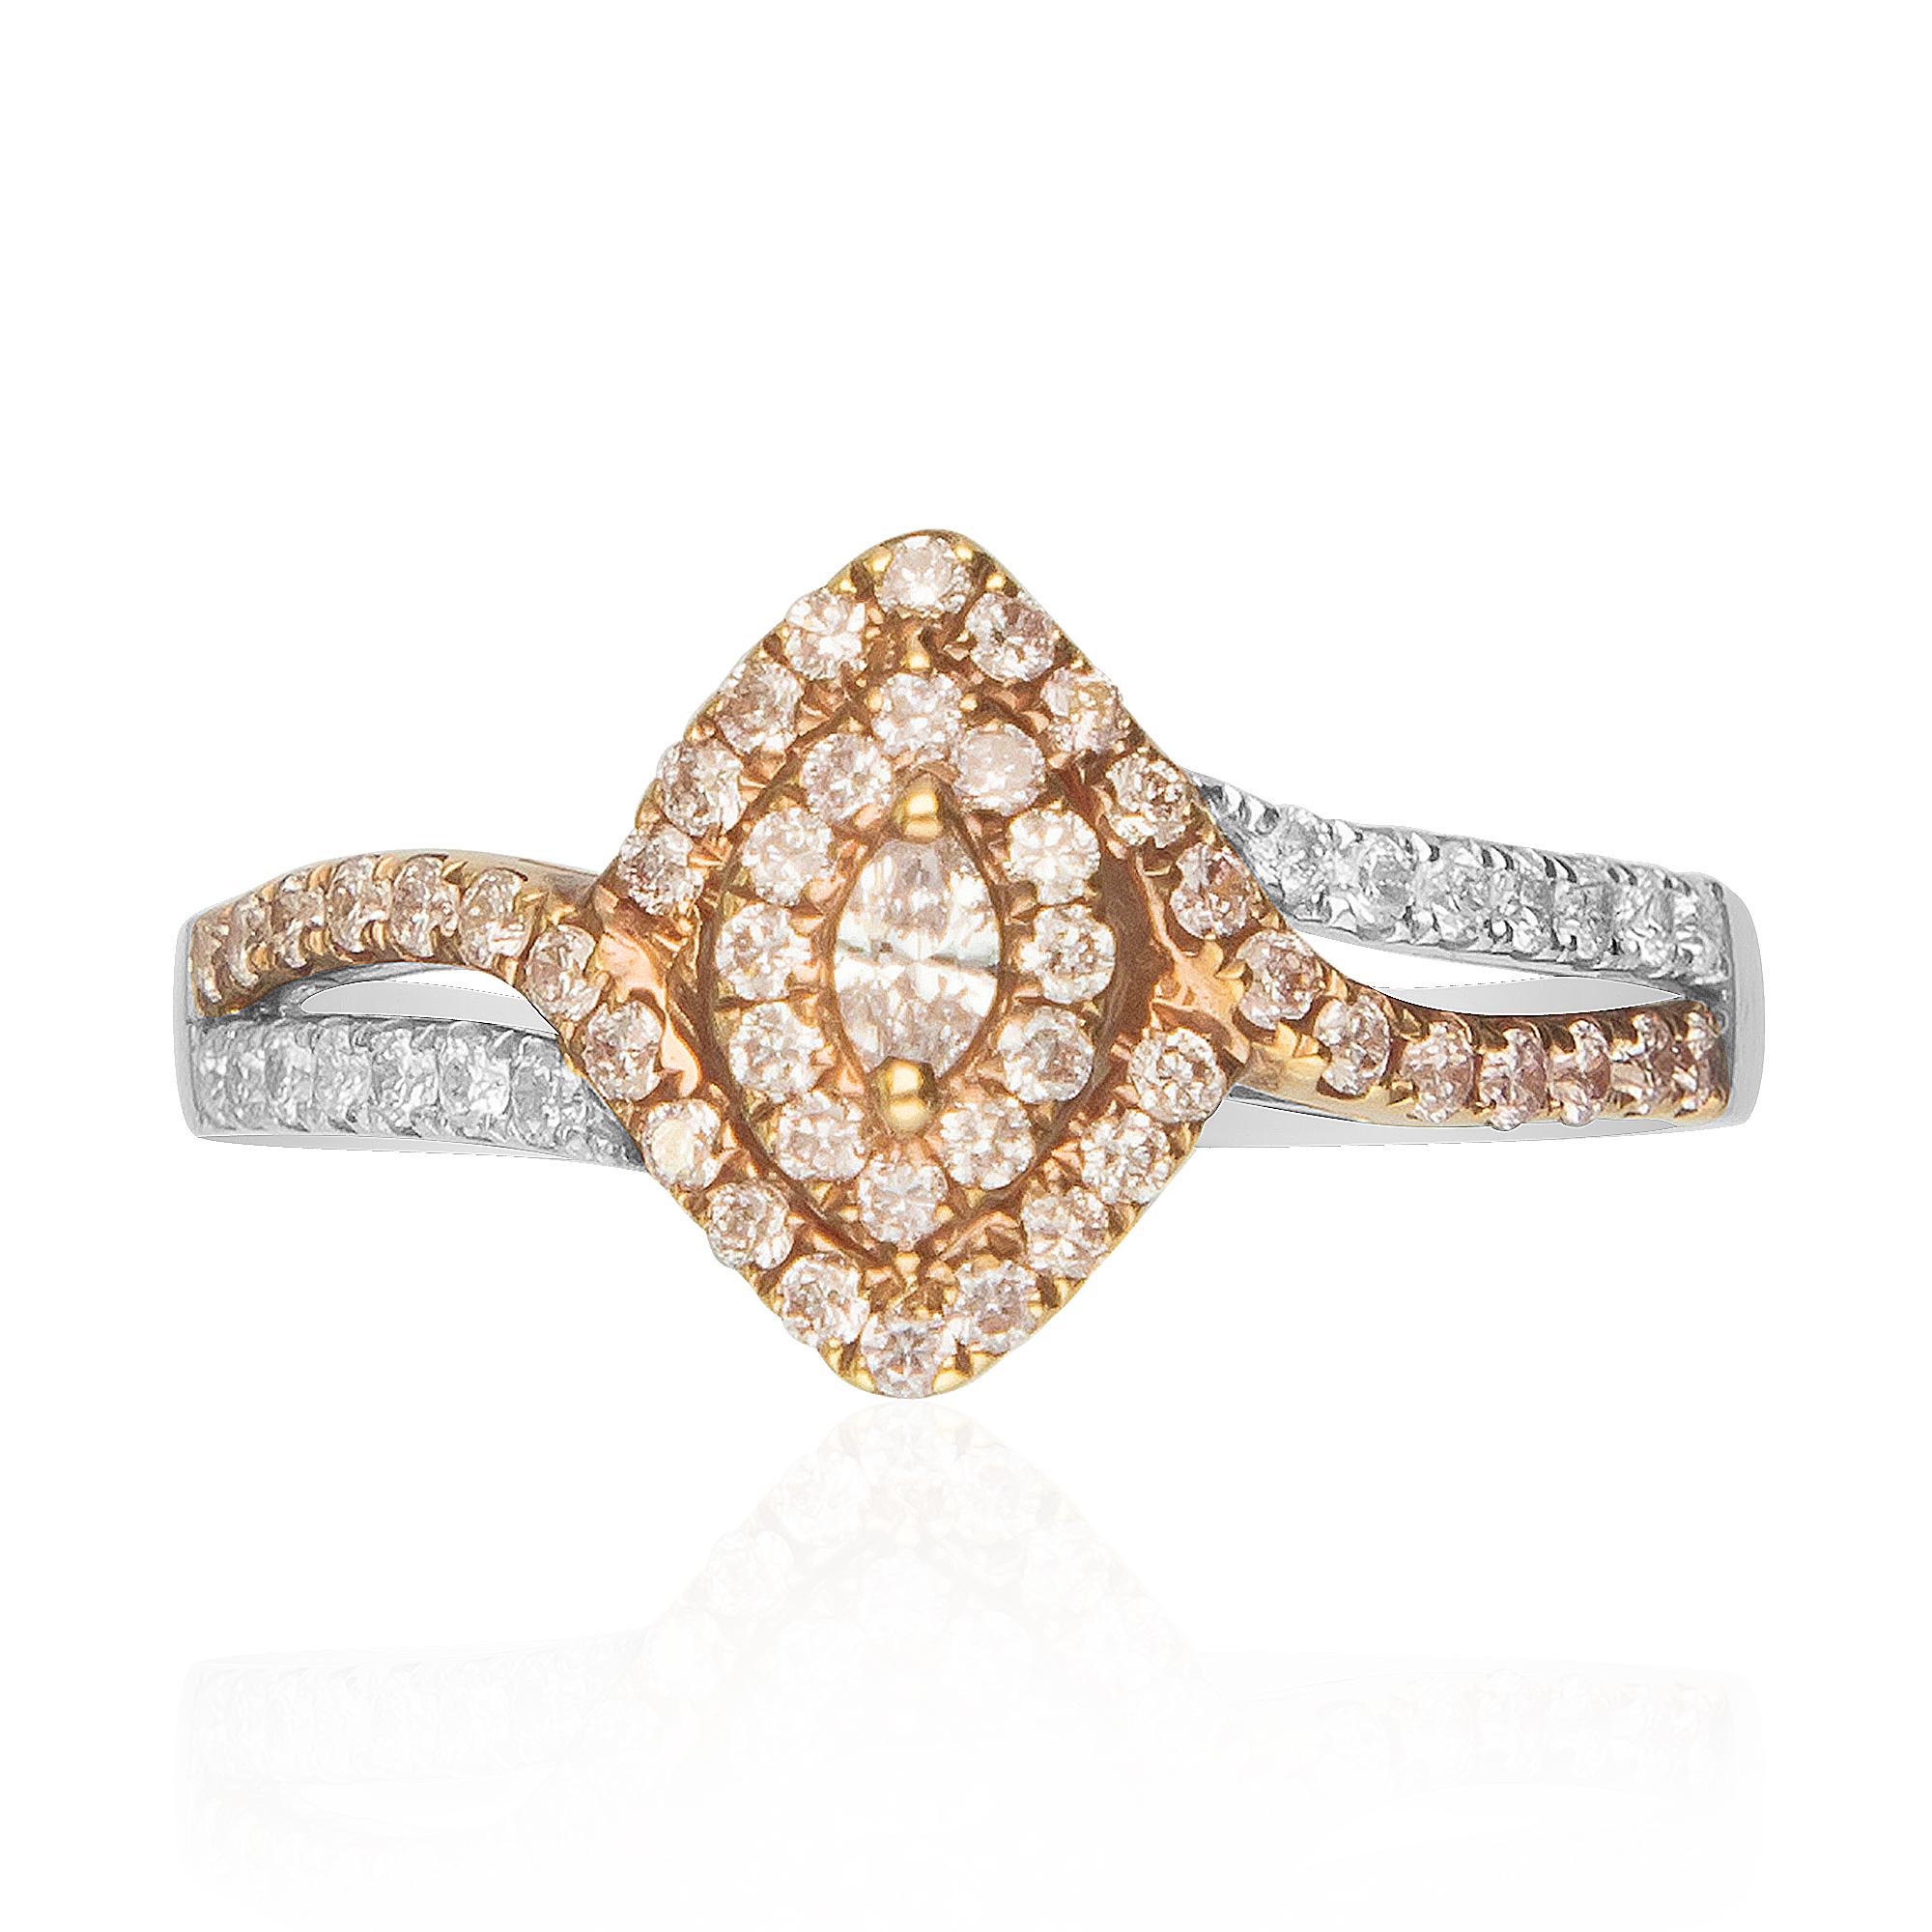 This Engagement ring is crafted in 18-karat Two Tone gold and features a GAL Certified Marquise Pink Diamond 0.08 Carat VS-SI quality, surrounded by 44 round Pink Diamonds 0.35 Carat,  & 14 Round Diamonds 0.10 Carat. This ring comes in size 7 and is